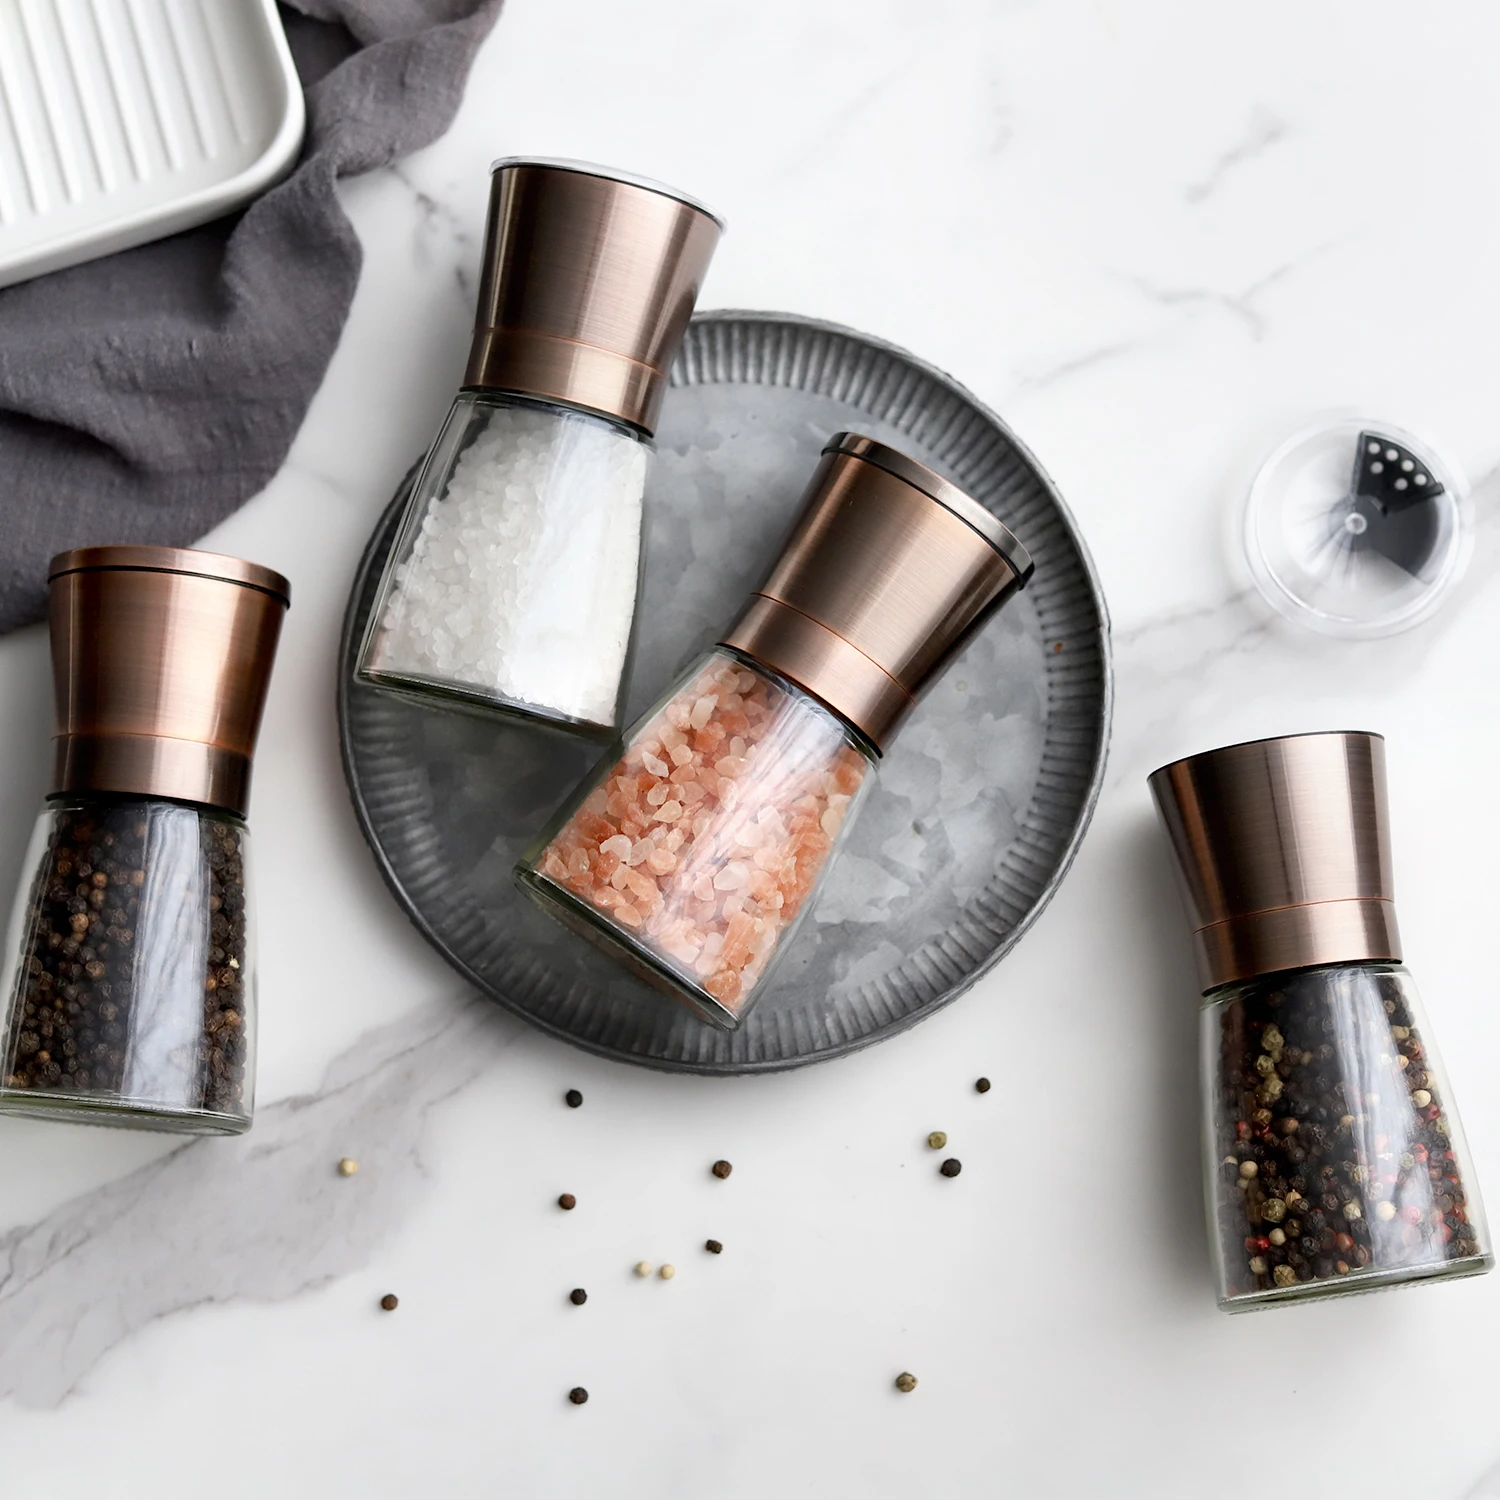 

Kitchen Gadgets Manual Salt and Pepper Mills Grinder Ceramic Conical Burr Dry Spice and Herb Mills Commercial Spics Grinders